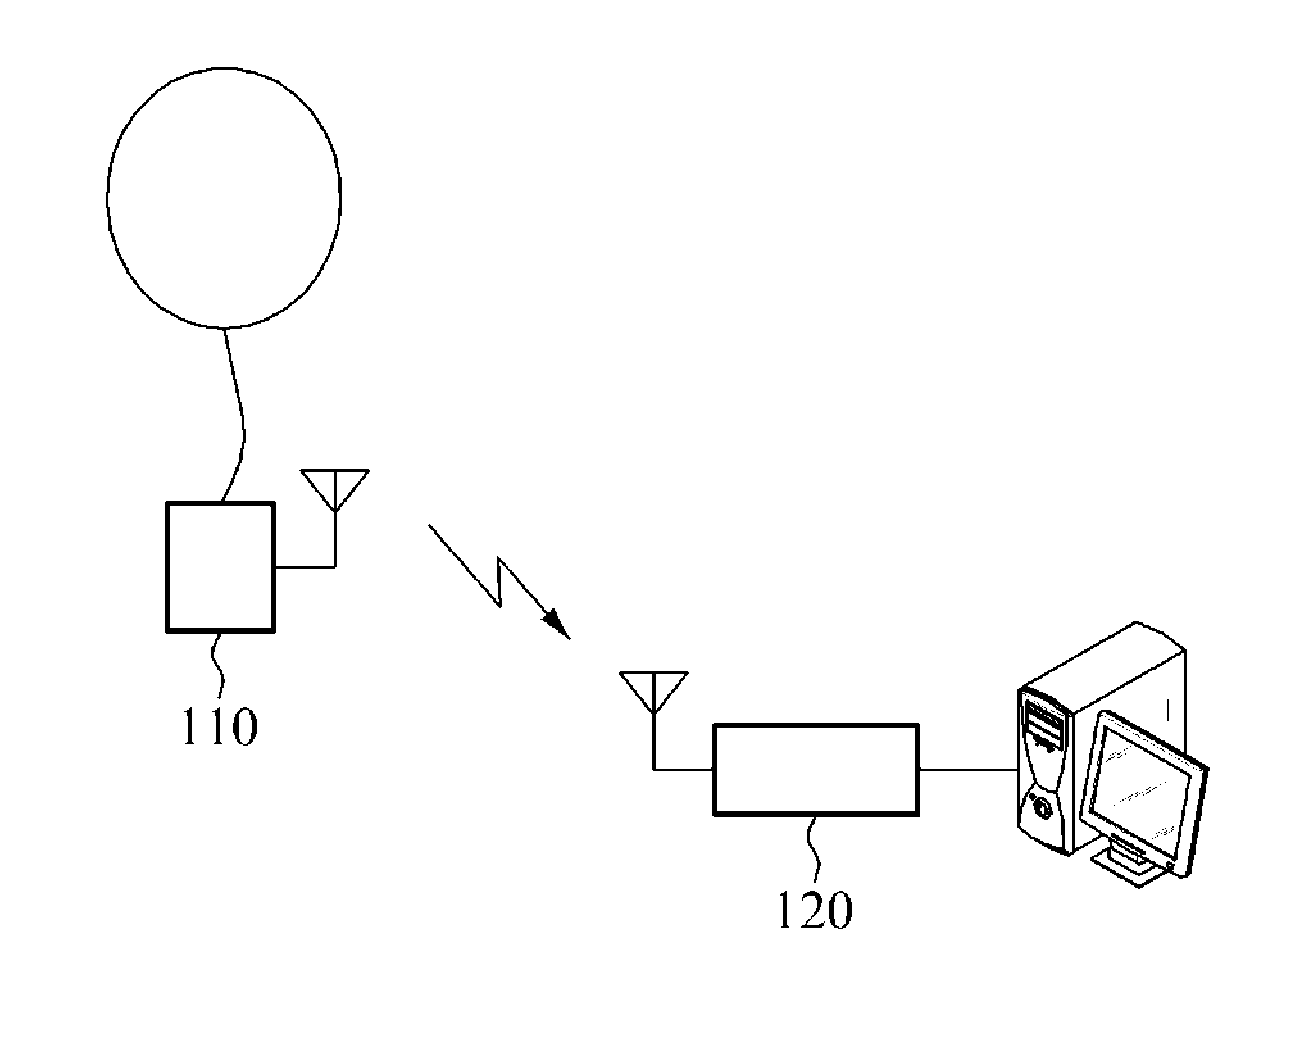 Apparatus and method for radiosonde power control based on position estimation